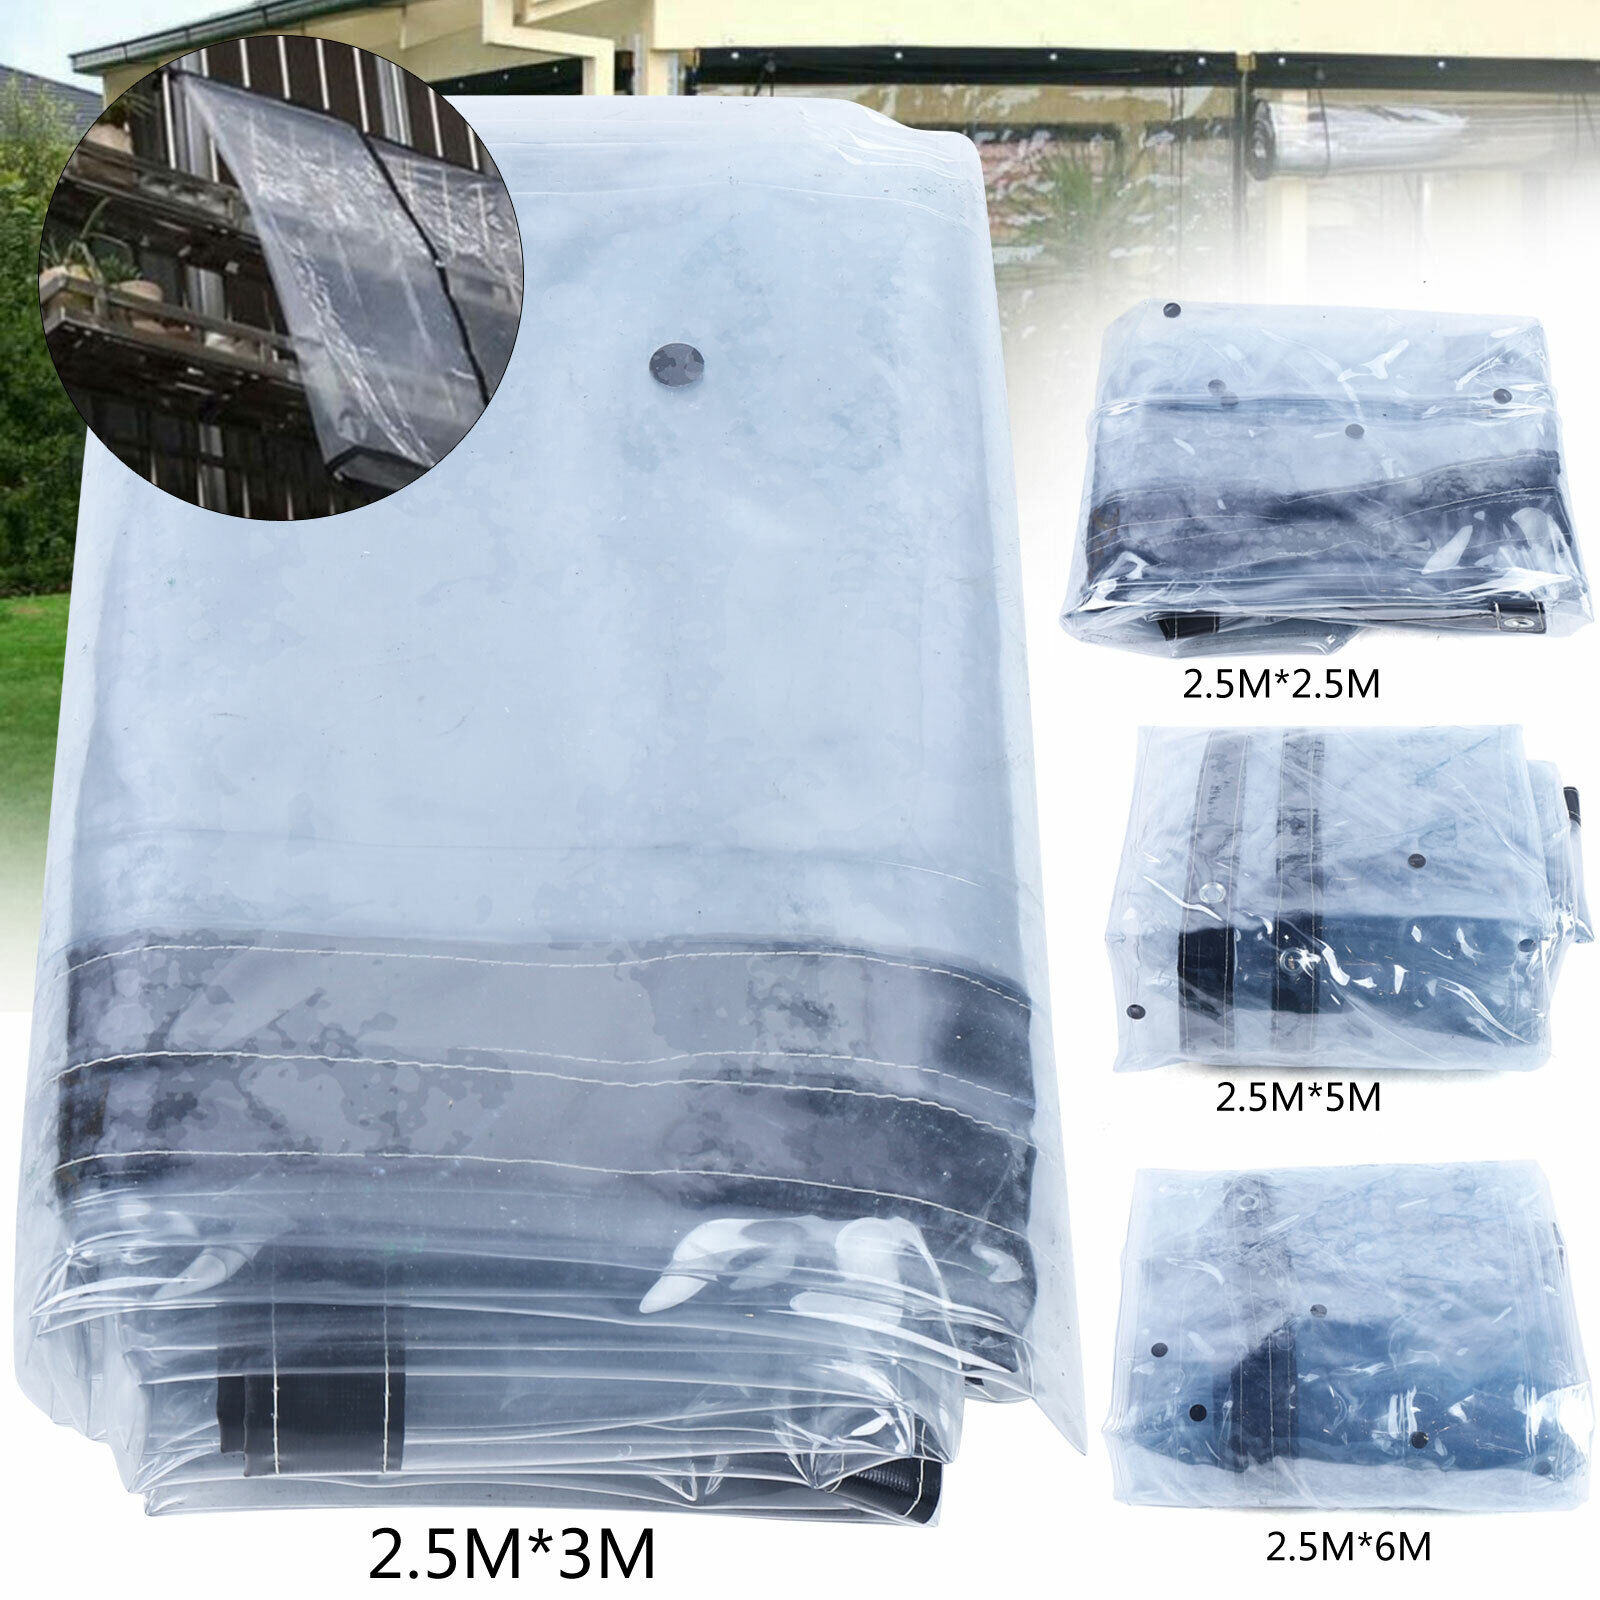 MULT-SIZE 0.5mm Waterproof Commercial Grade Clear High Max 77% OFF order PVC Can Awning